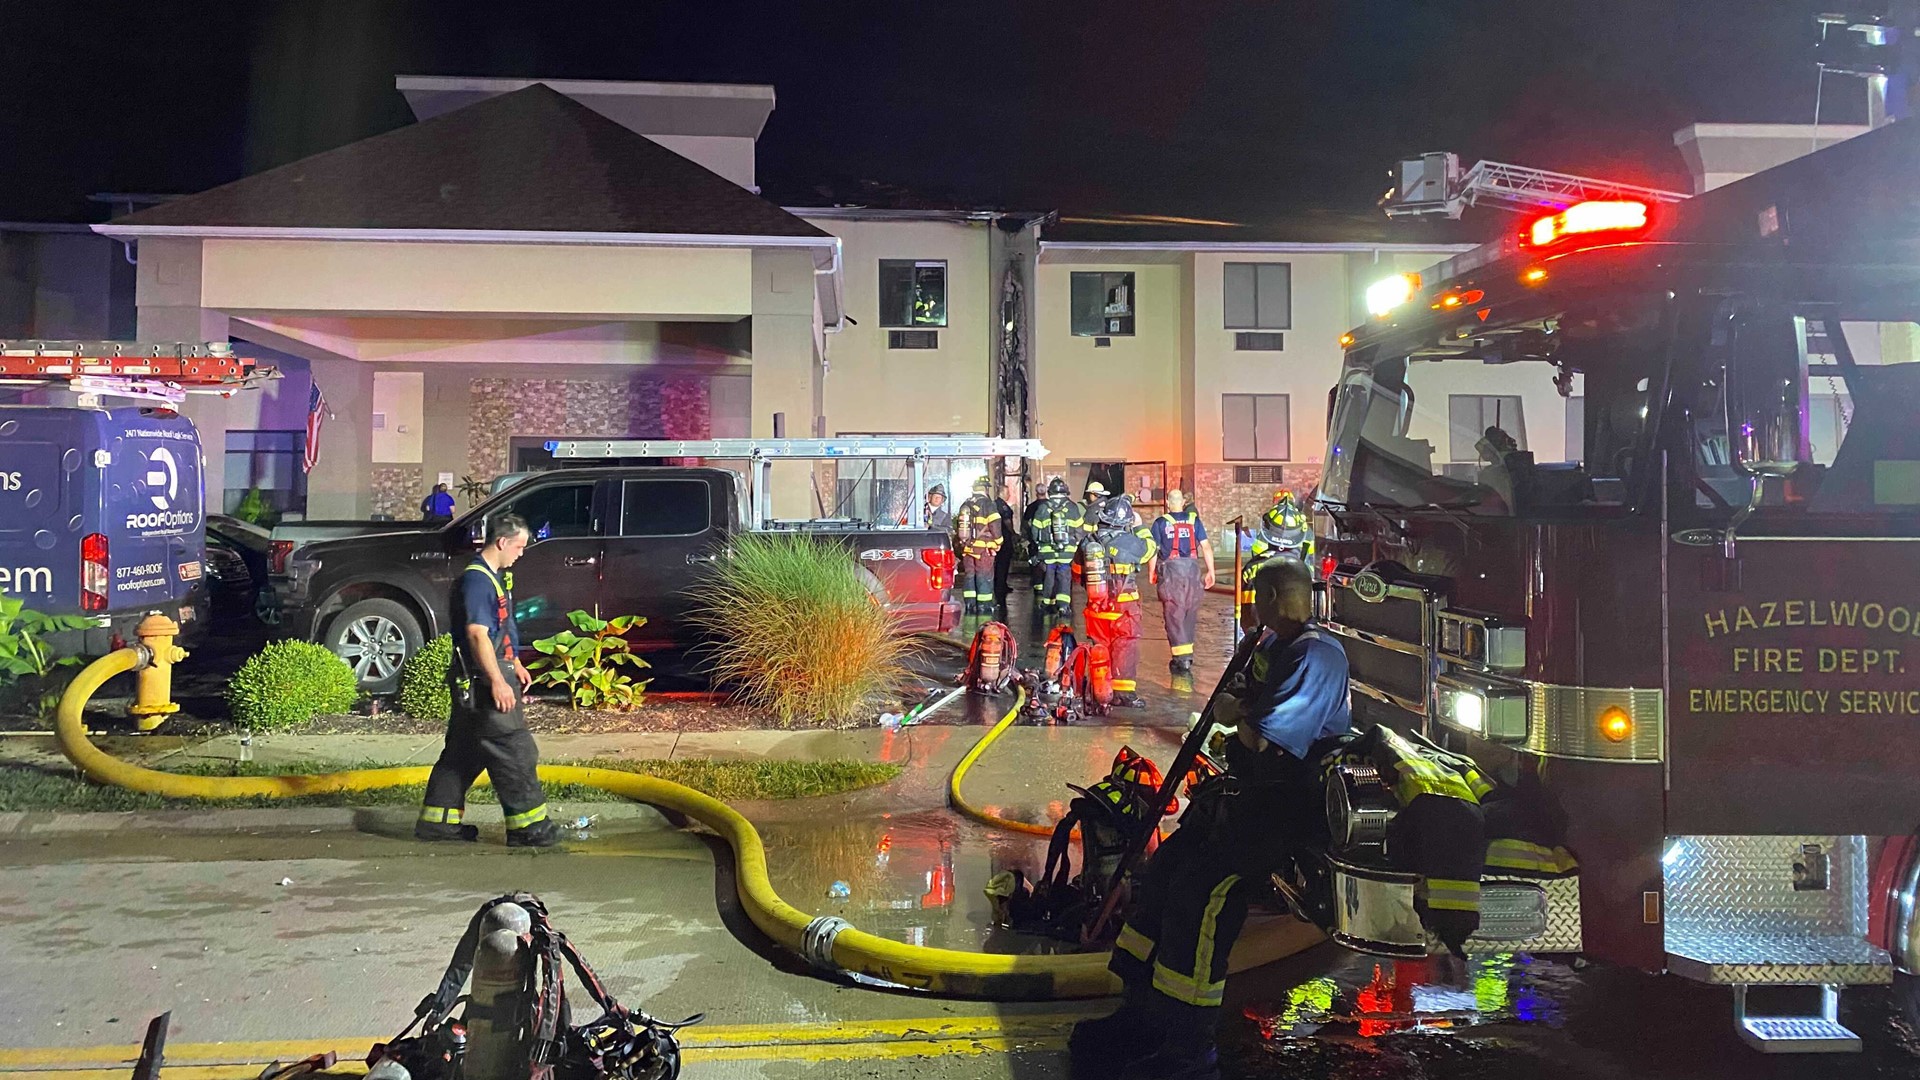 A fire broke out at the Comfort Inn in Hazelwood early Thursday morning. A police officer suffered smoke inhalation but there were no other injuries.